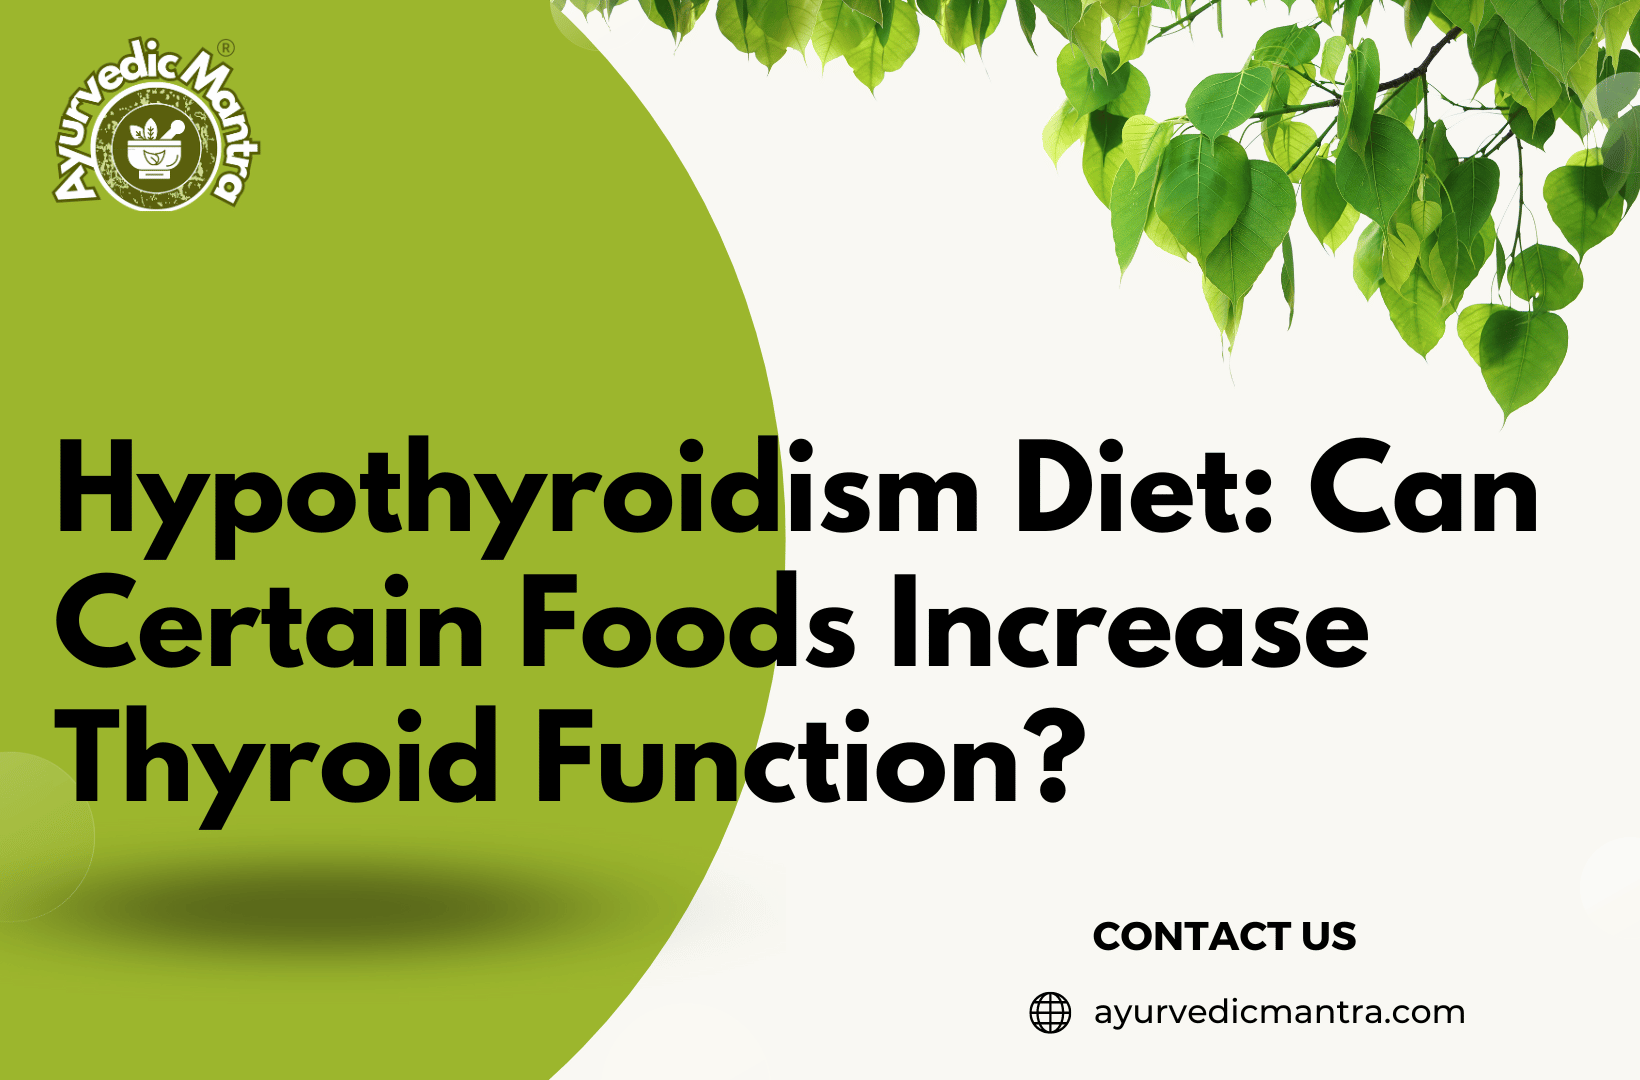 Hypothyroidism Diet Can Certain Foods Increase Thyroid Function